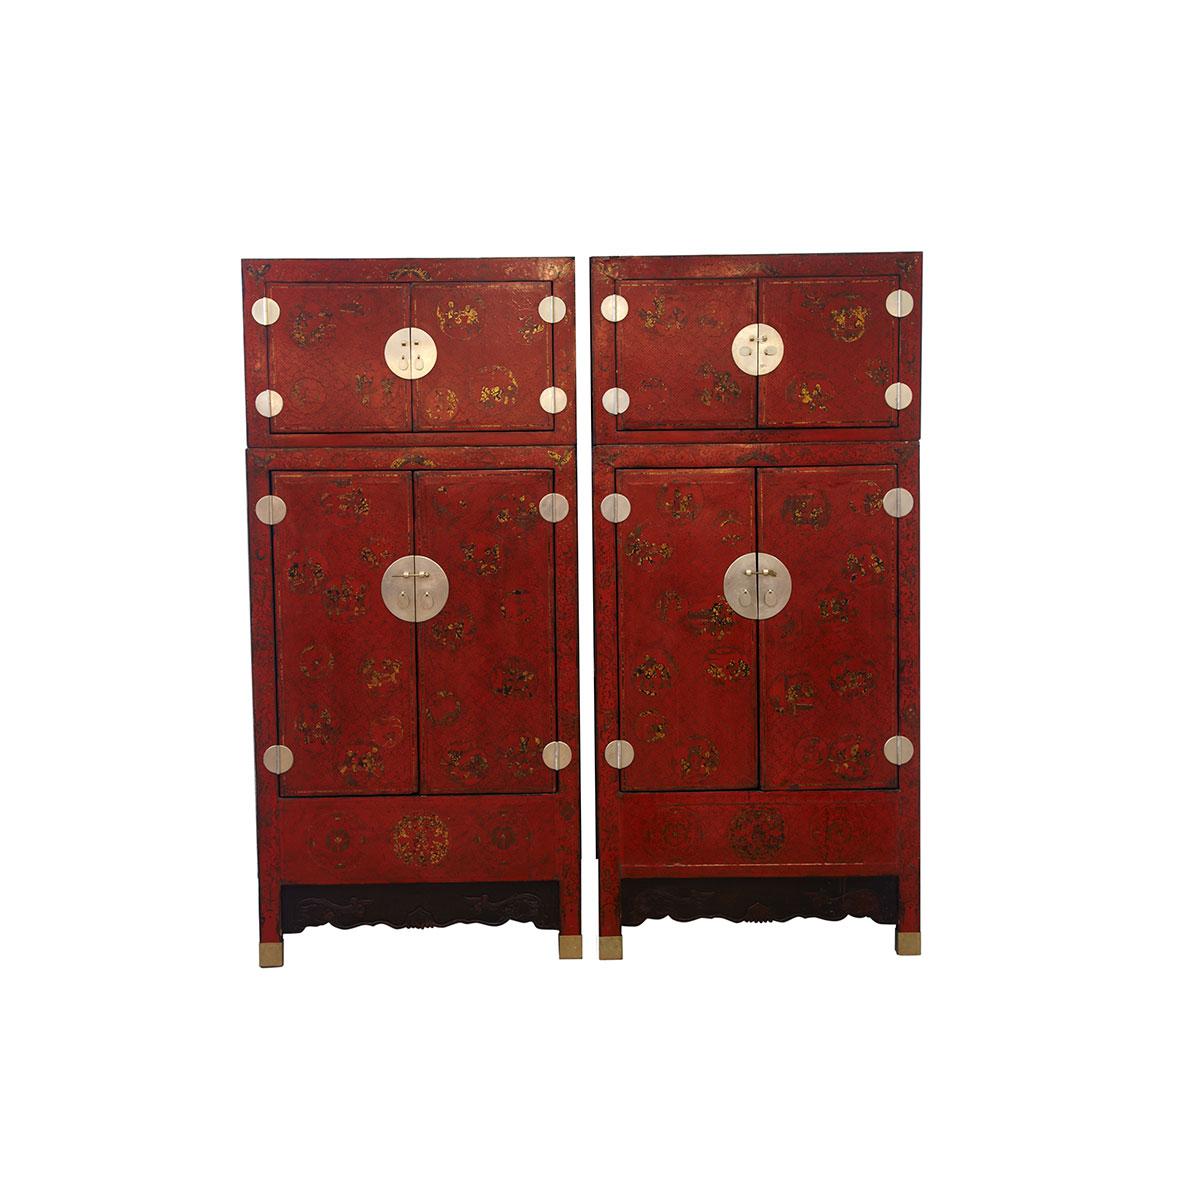 Pair of Massive Red Lacquer Compound Cabinets, 19th Century